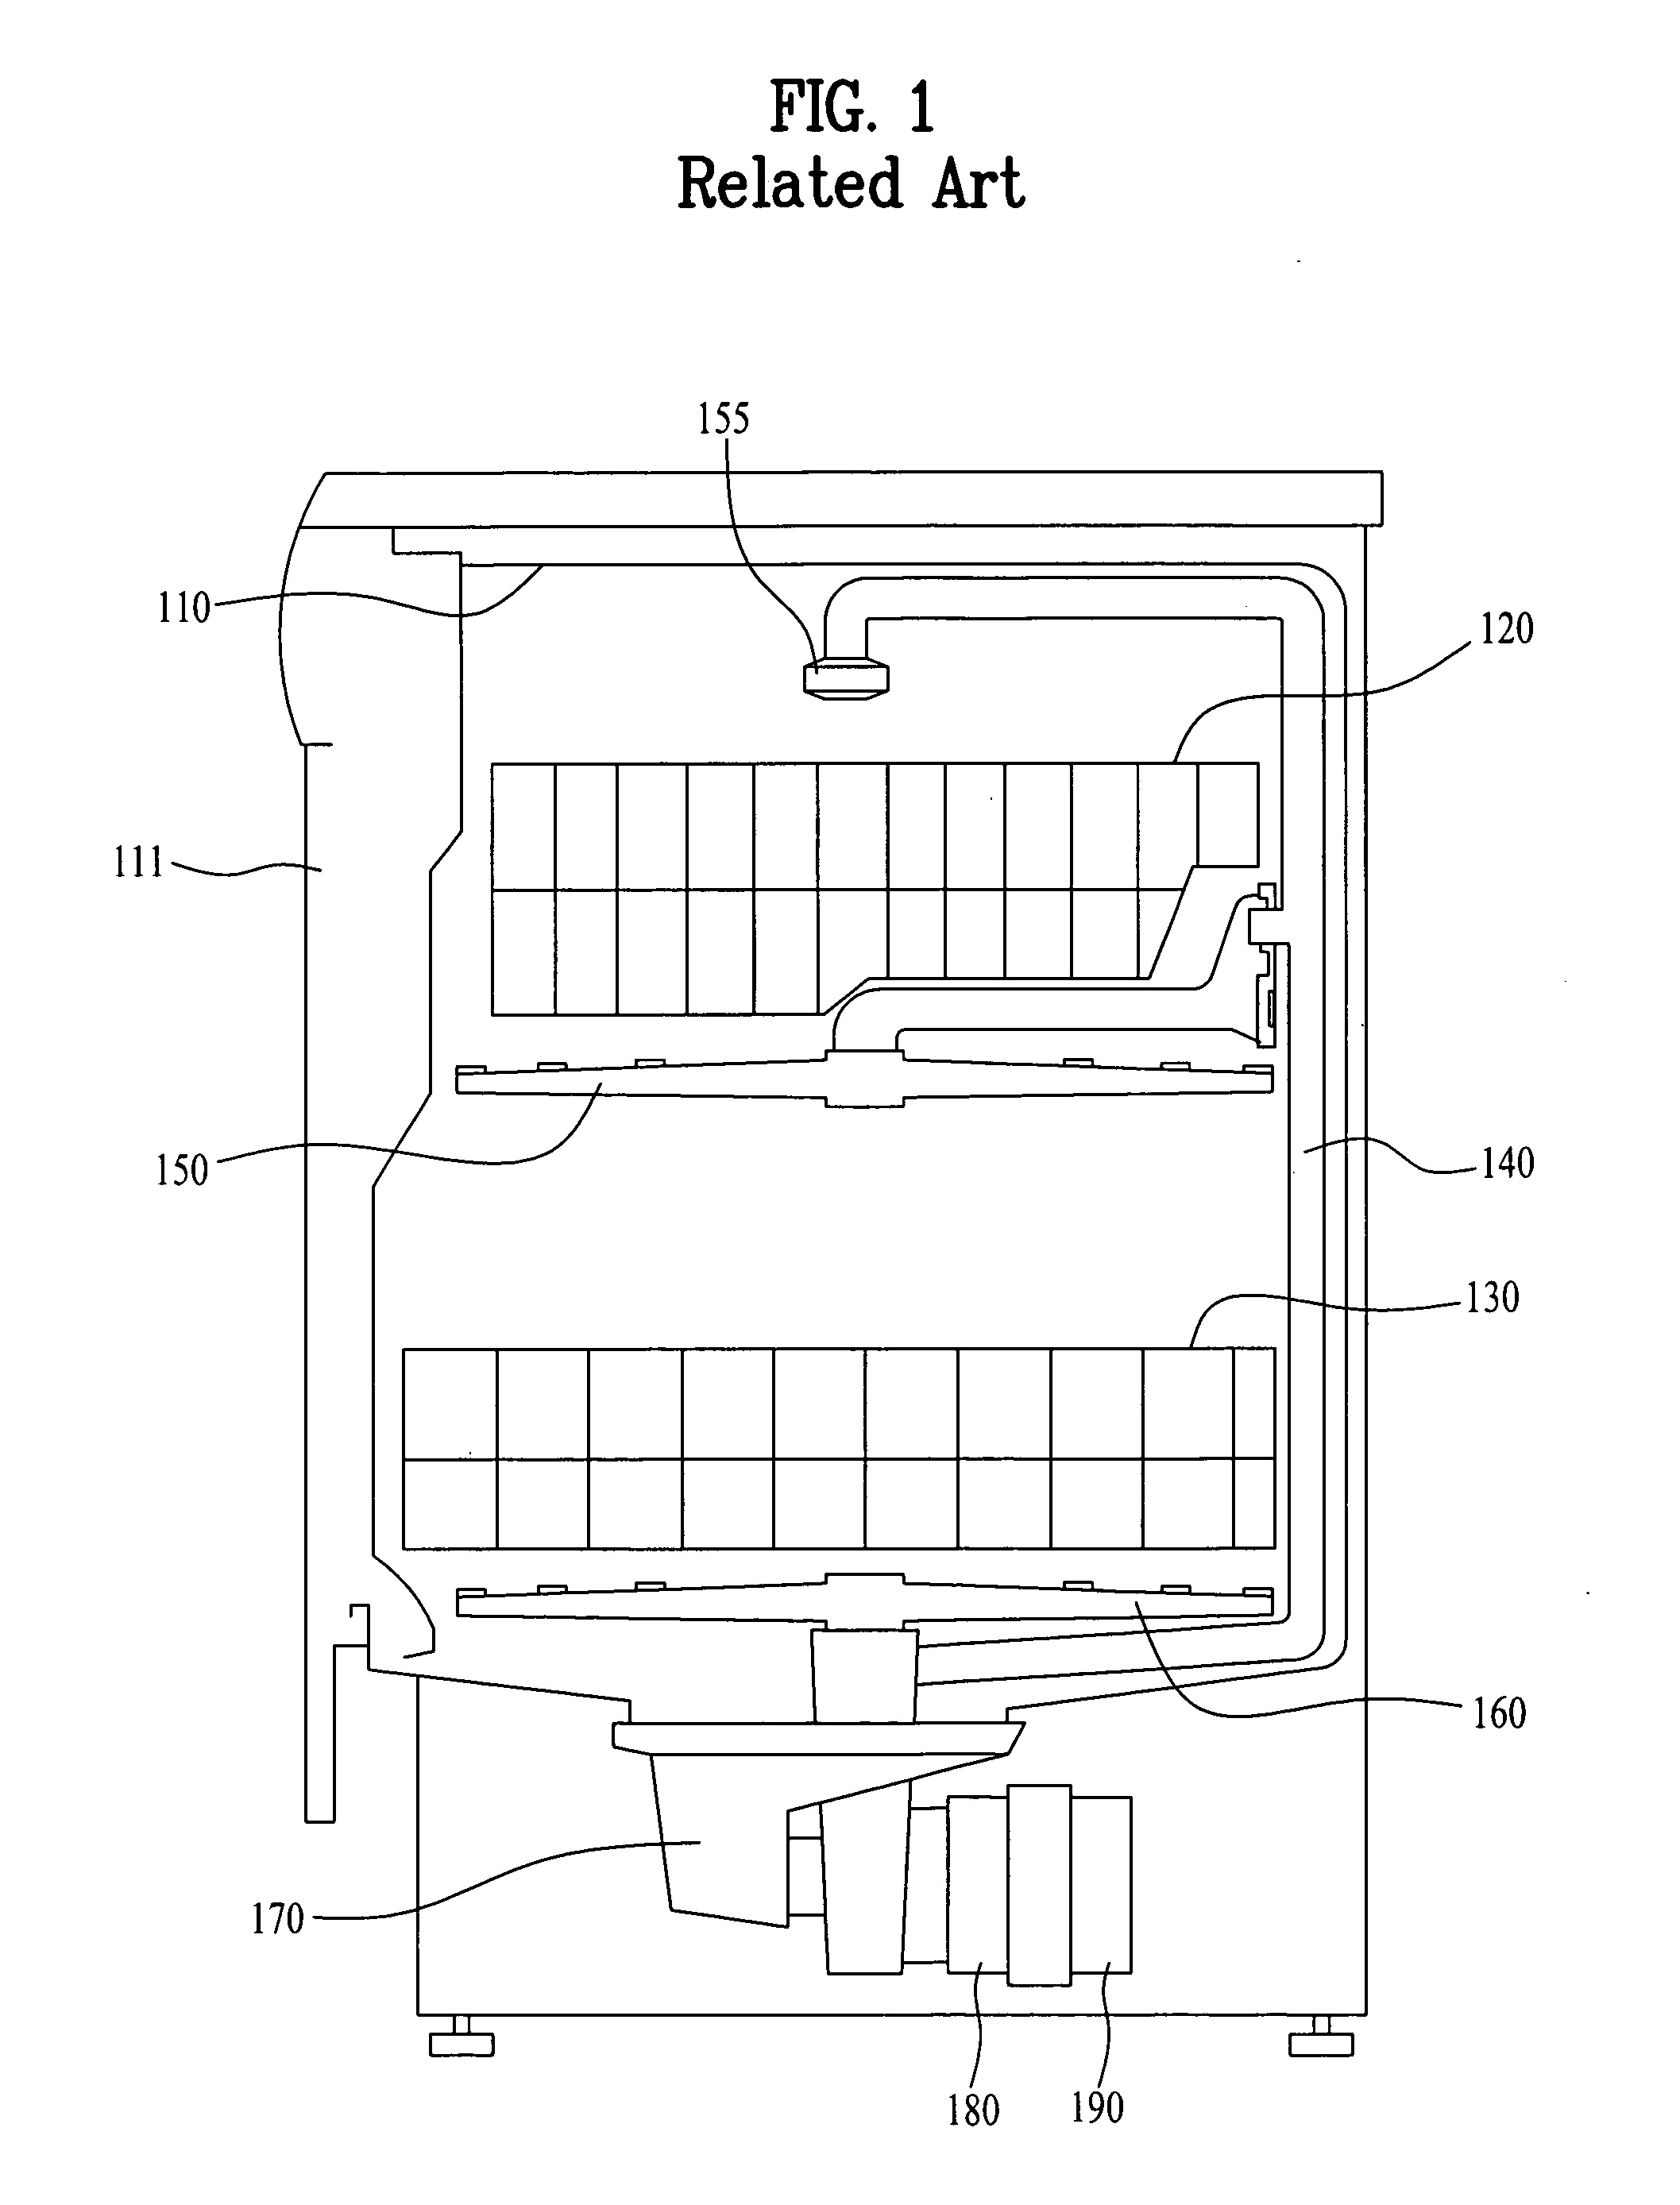 Auxiliary rack and automatic dishwasher using the same